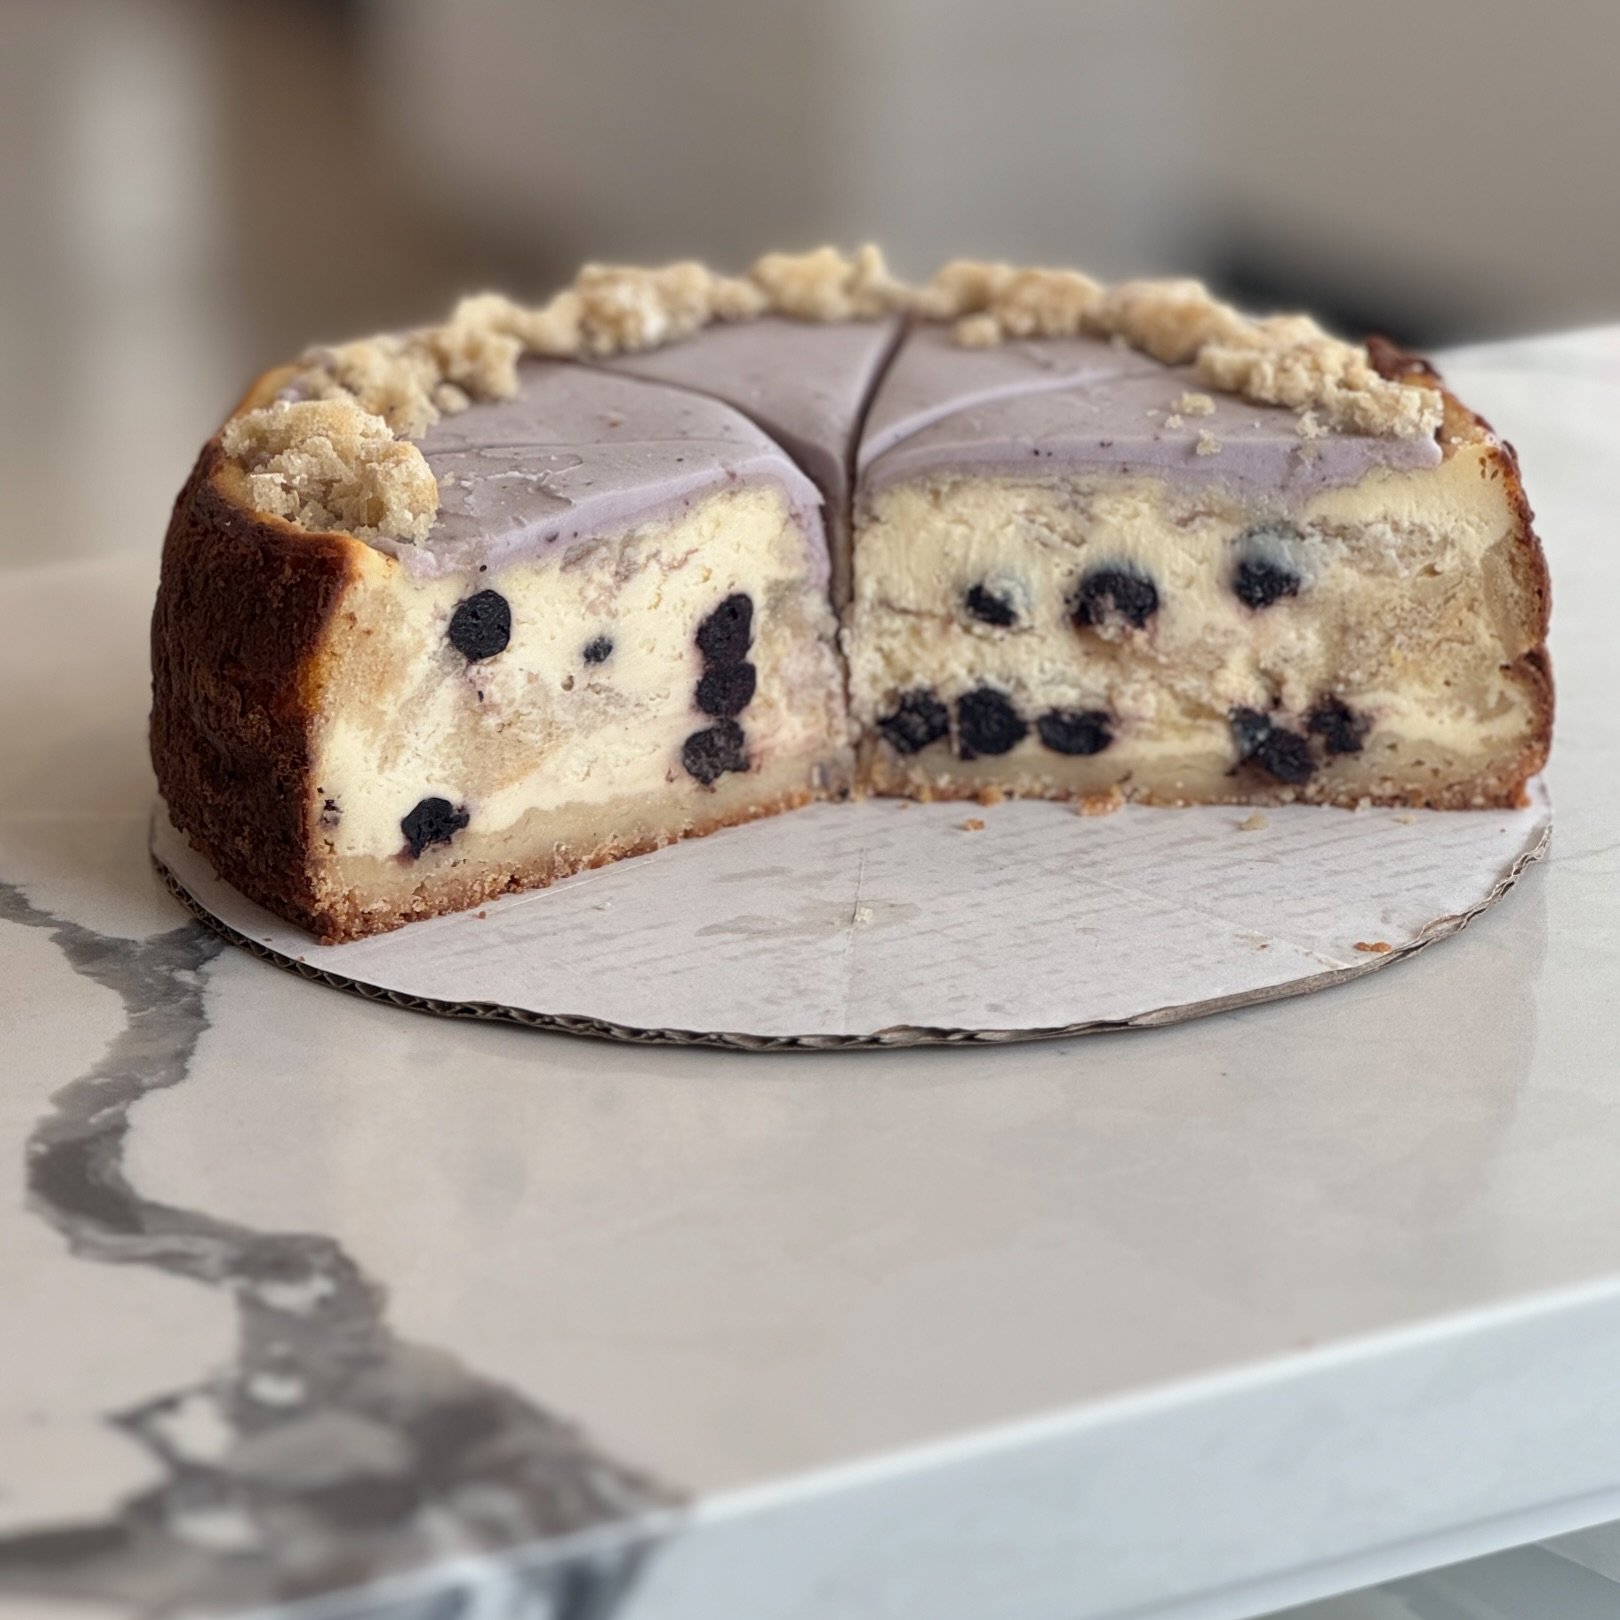 Blueberry Pancake Cheesecake🥞🫐
Shortbread crust, maple blueberry cheesecake with a layer of pancakes in the middle, topped with blueberry buttercream and crumbled pancakes! 

We have this flavor over the weekend at all shops but only a couple slice